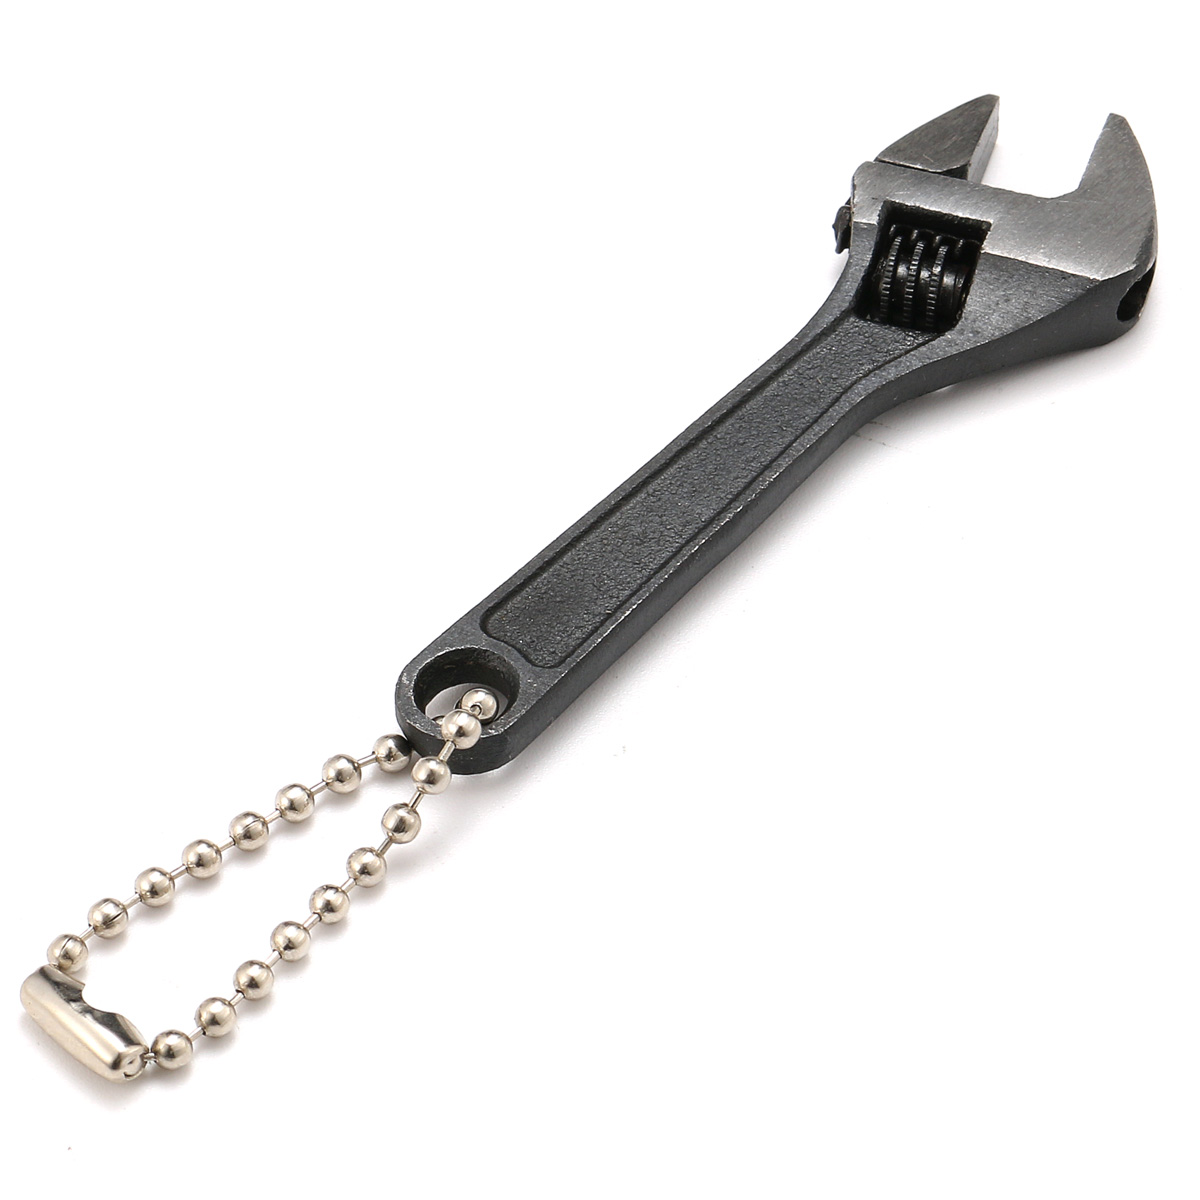 2Pcs-25inch-amp-4inch-Mini-Metal-Adjustable-Wrenches-Spanner-Hand-Jaw-Wrench-0-15mm-0-10mm-1137874